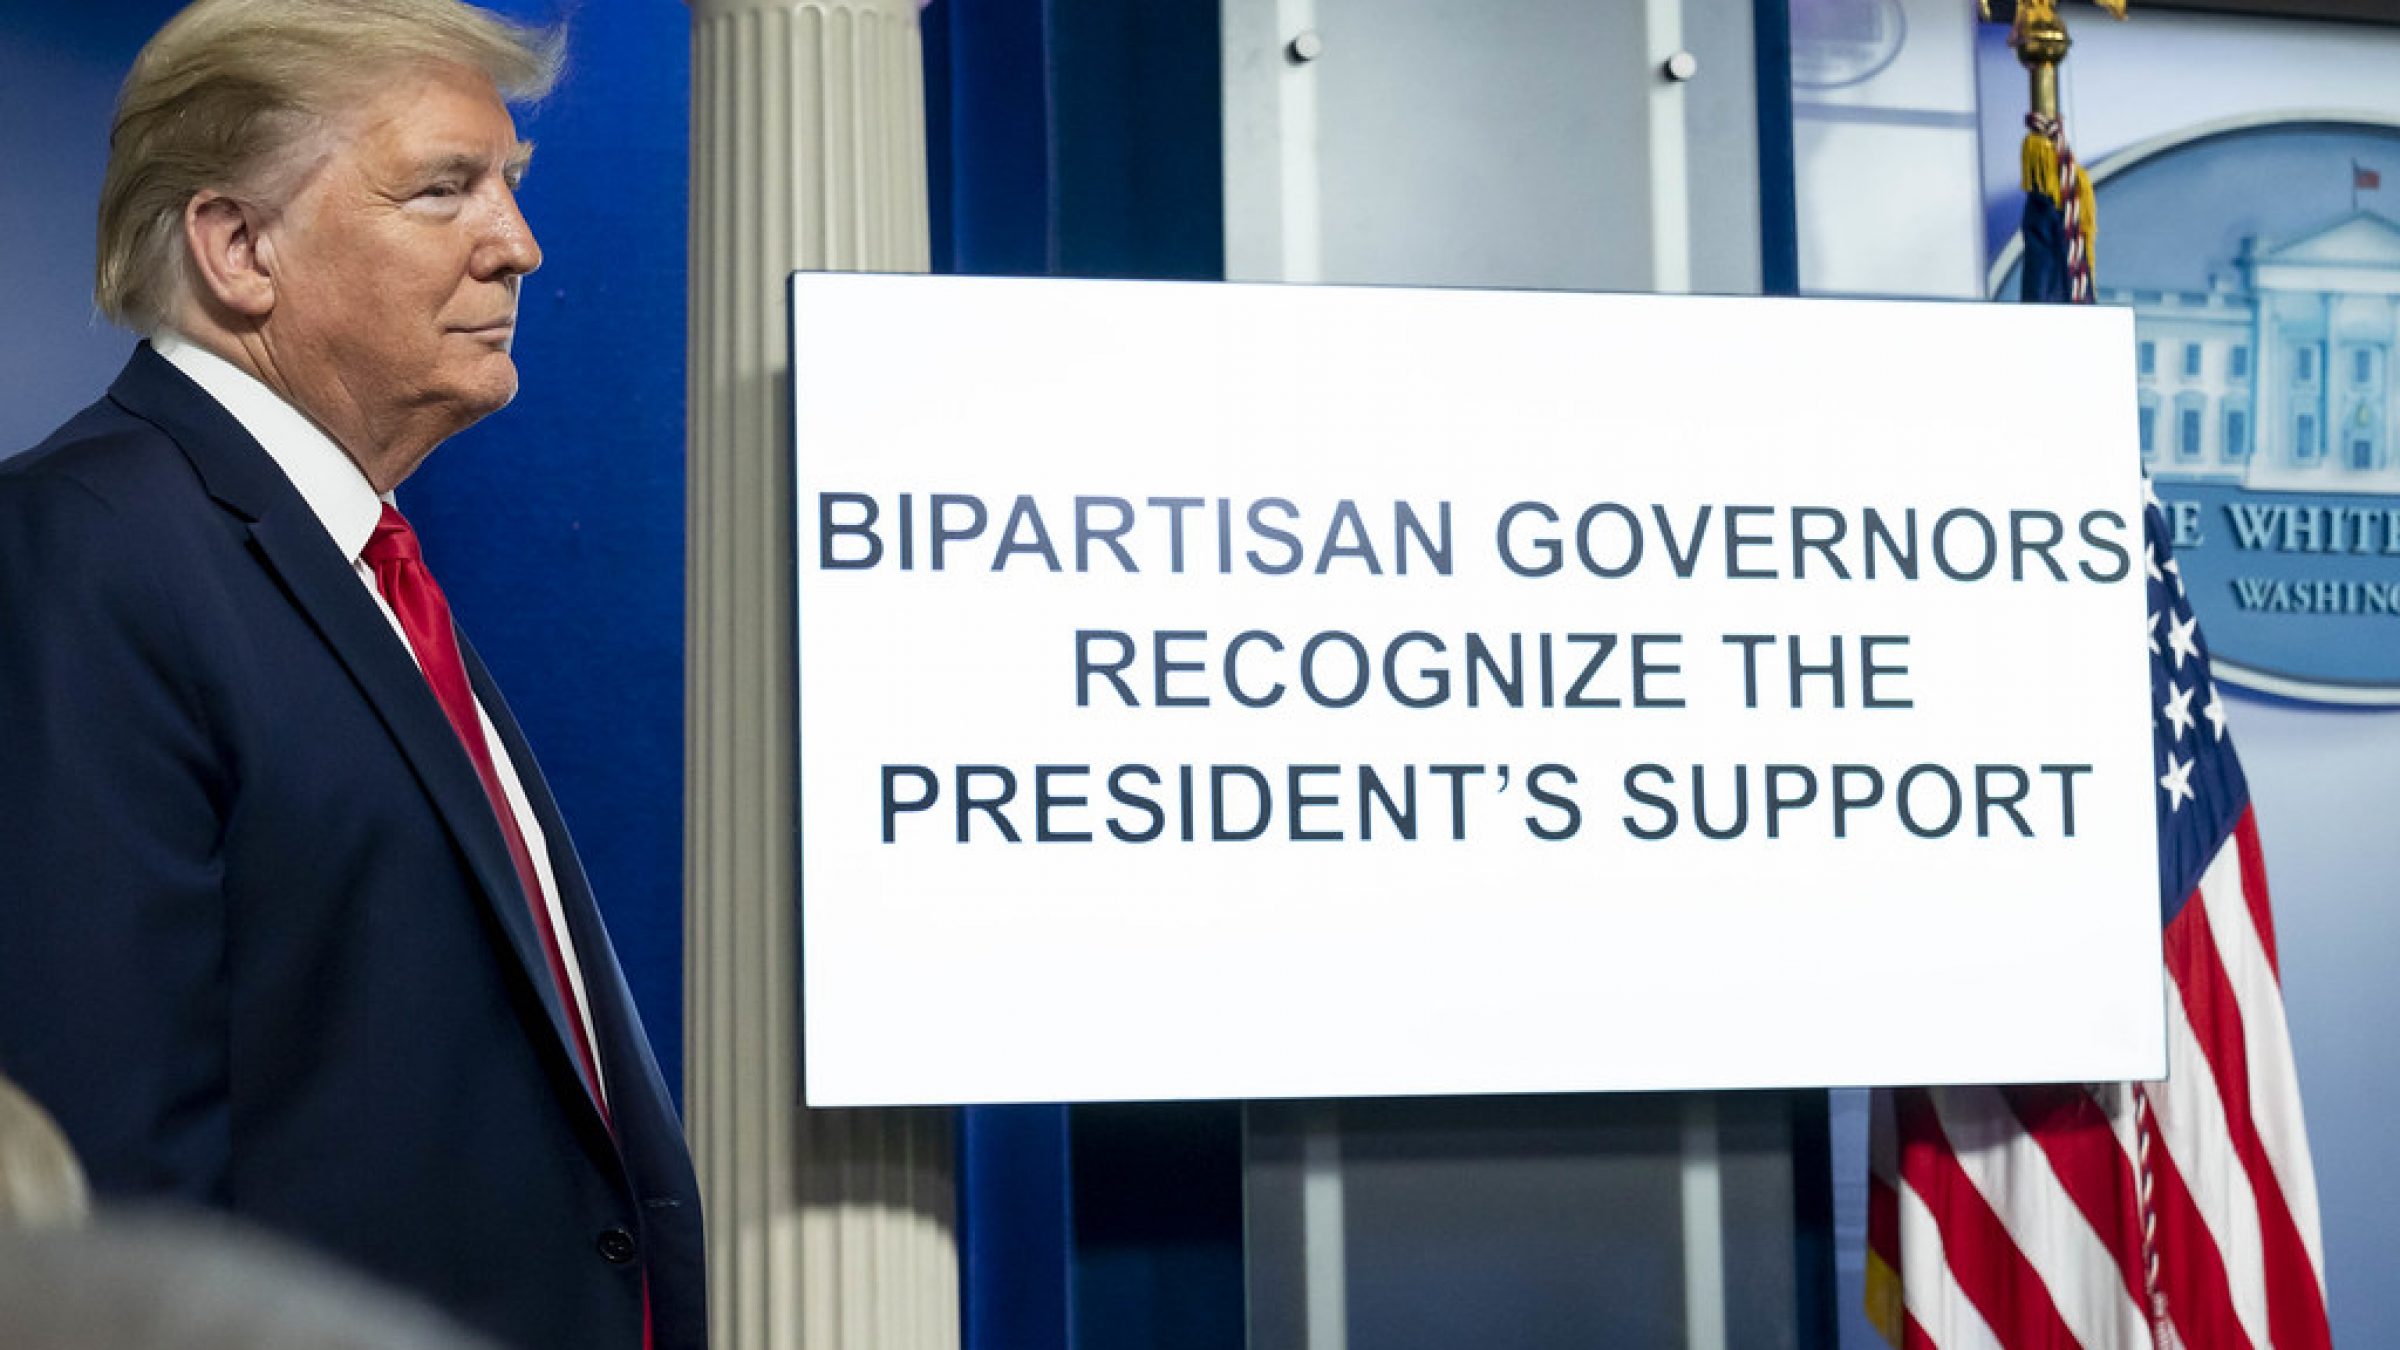 Trump smirks aside a sign that reads "Bipartisan Governors Recognize the President's Support" in all capital letters in the White House Press Briefing Room.